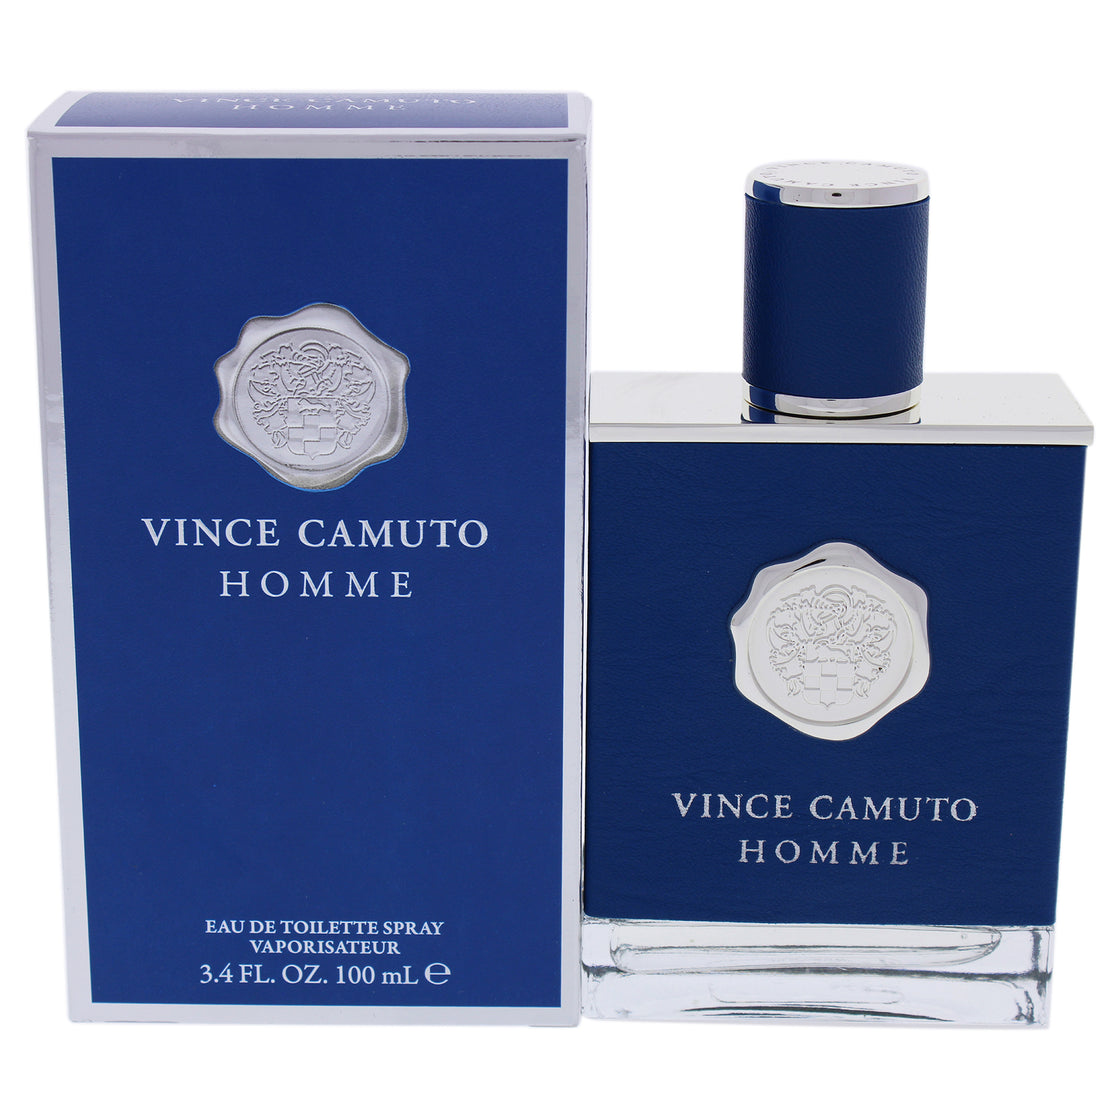 Vince Camuto Homme by Vince Camuto for Men - 3.4 oz EDT Spray